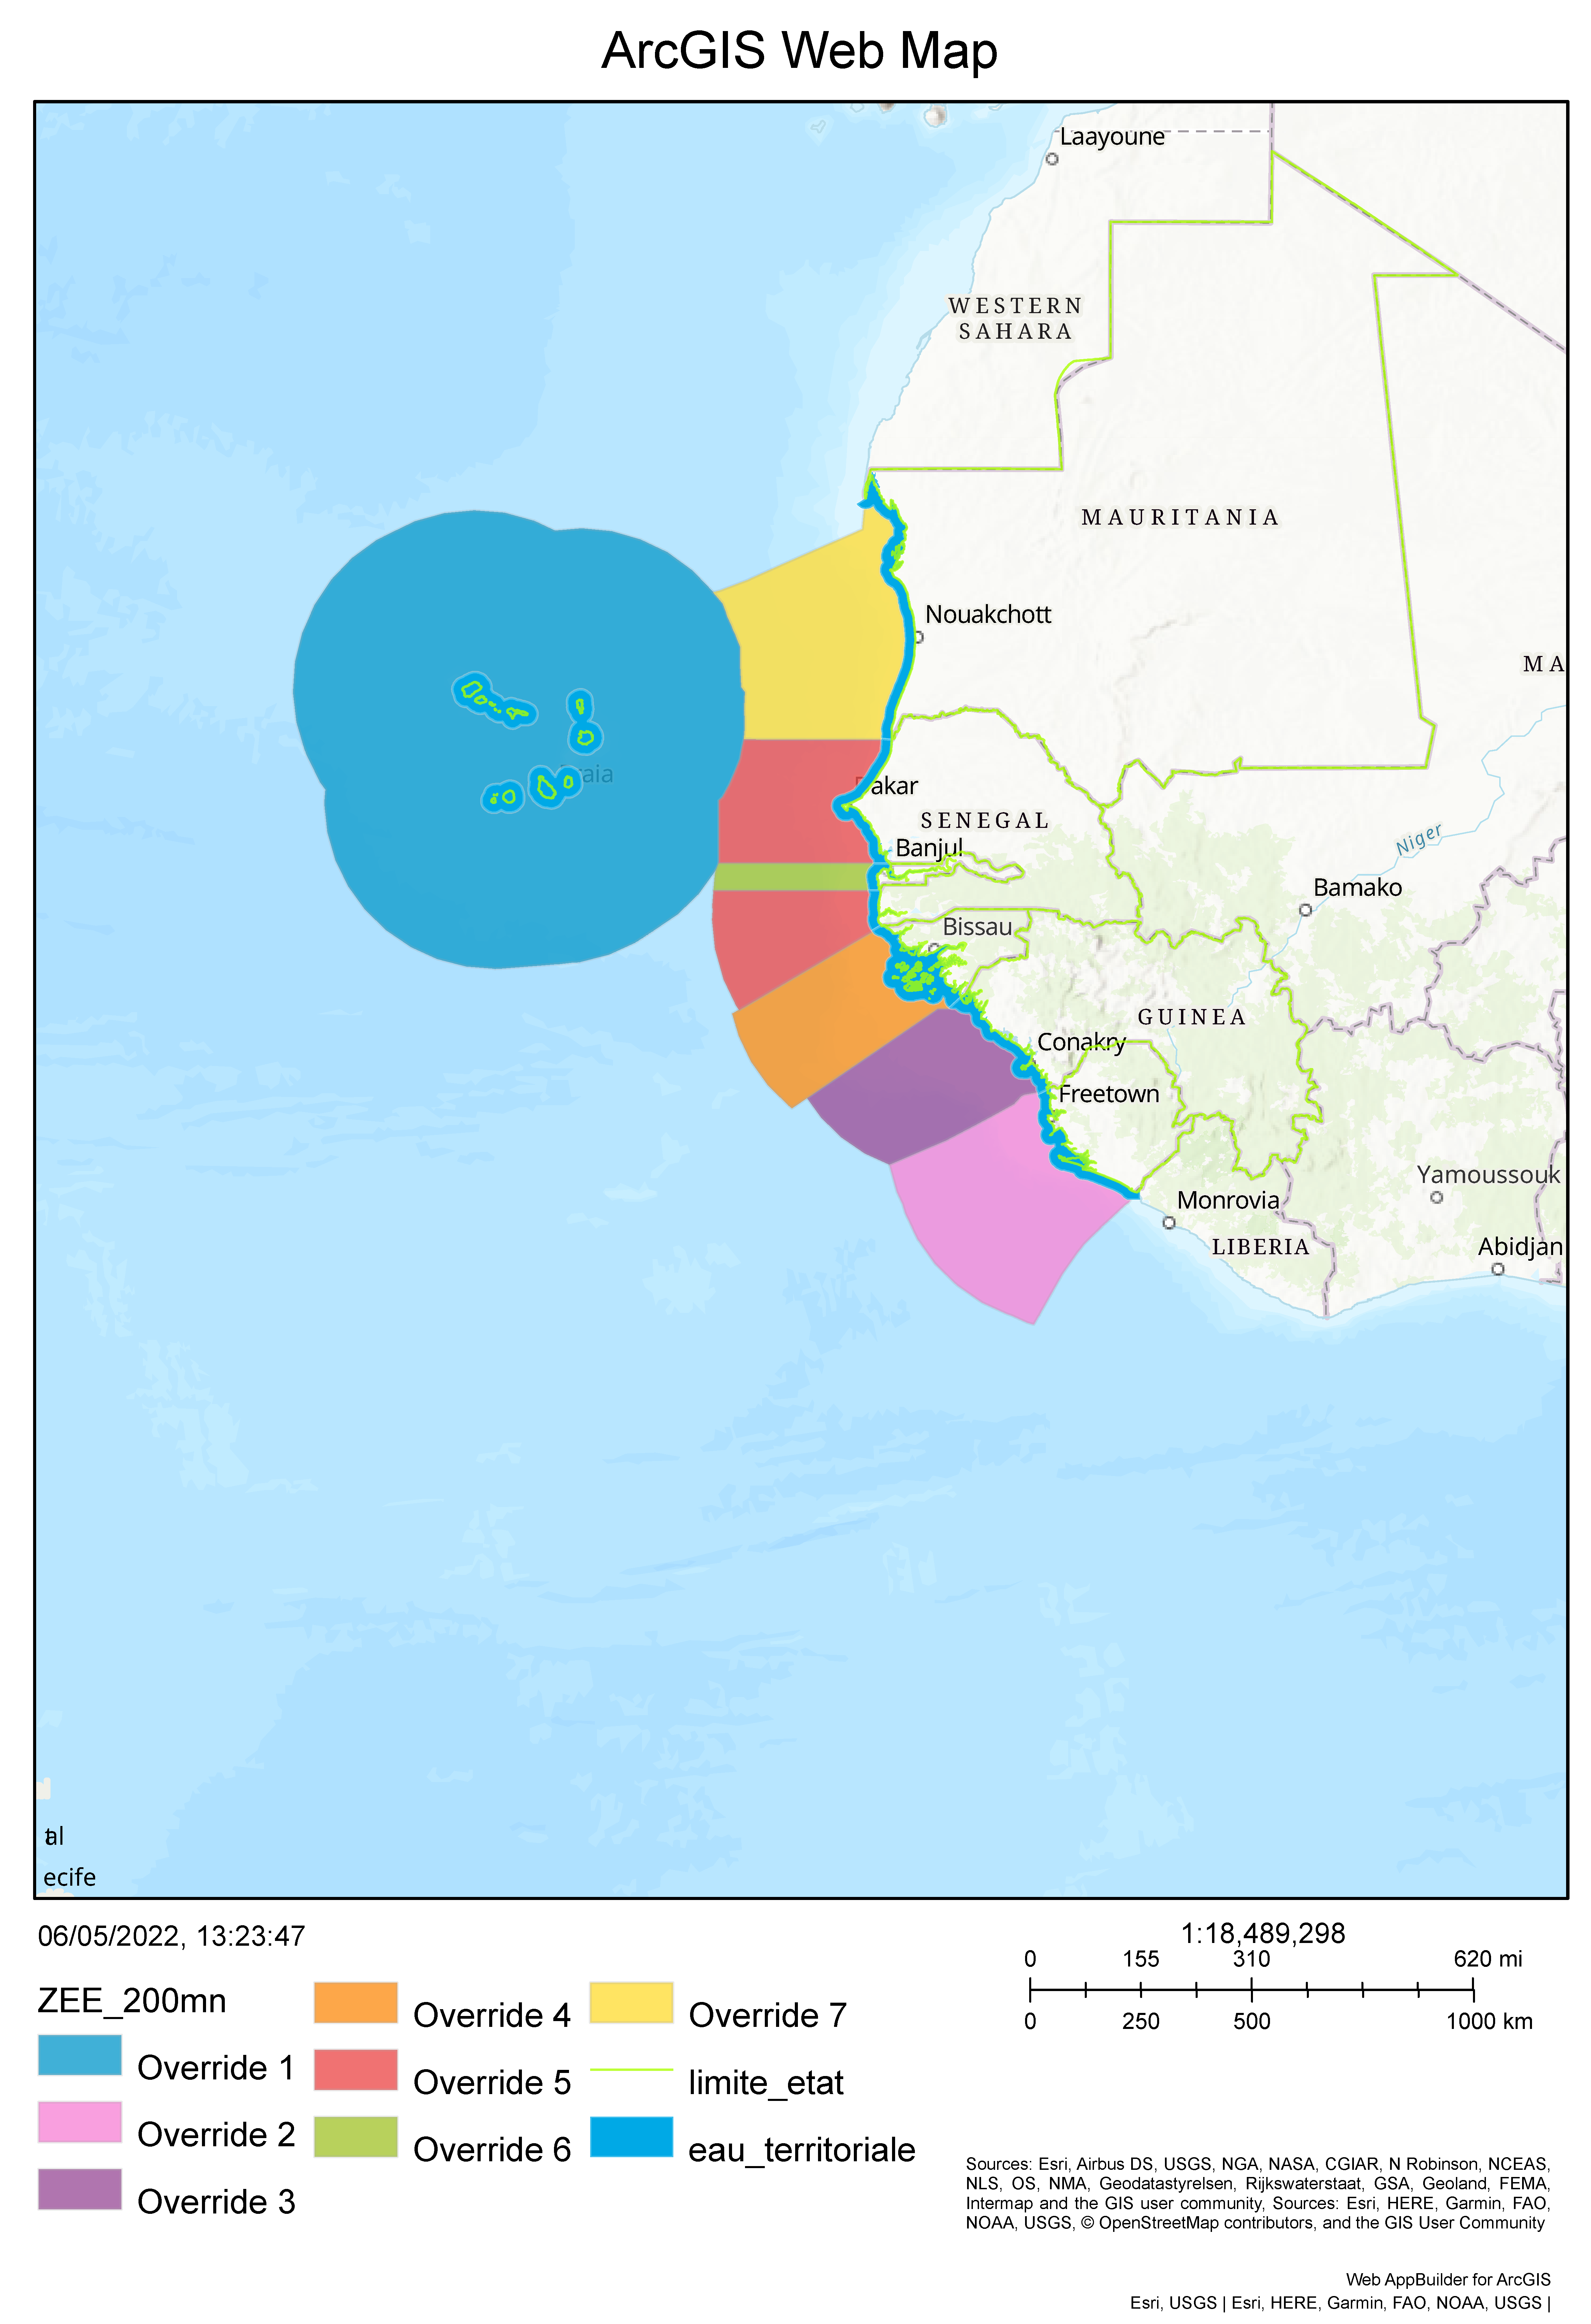 Stakeholders' participation in the creation of proposed Niumi Biosphere  Reserve, the Gambia